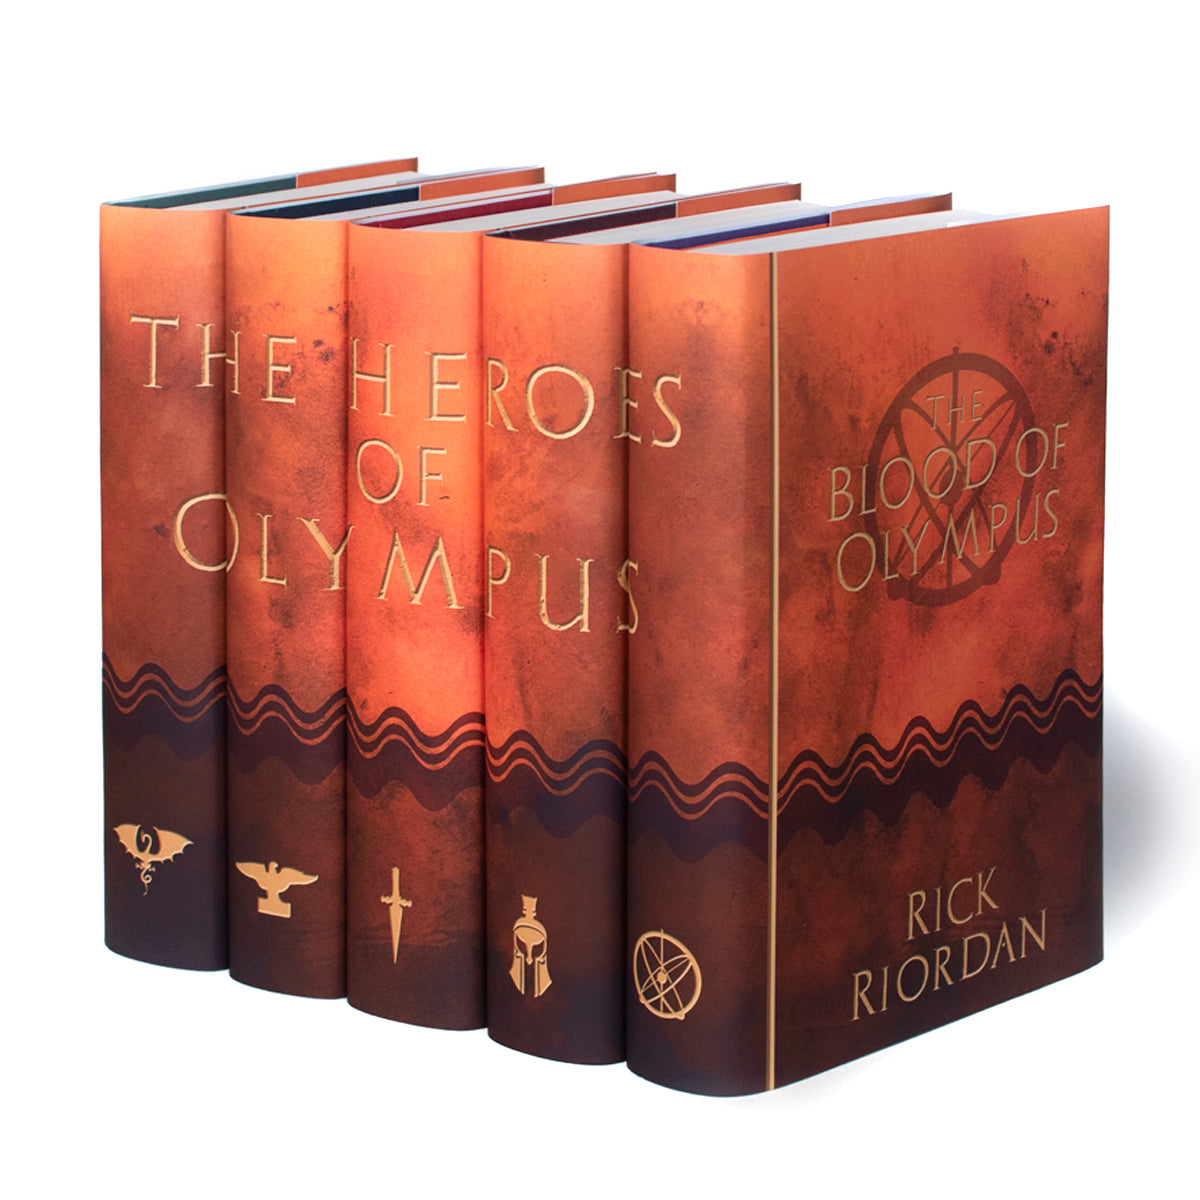 Customized The Heroes of Olympus Book Set